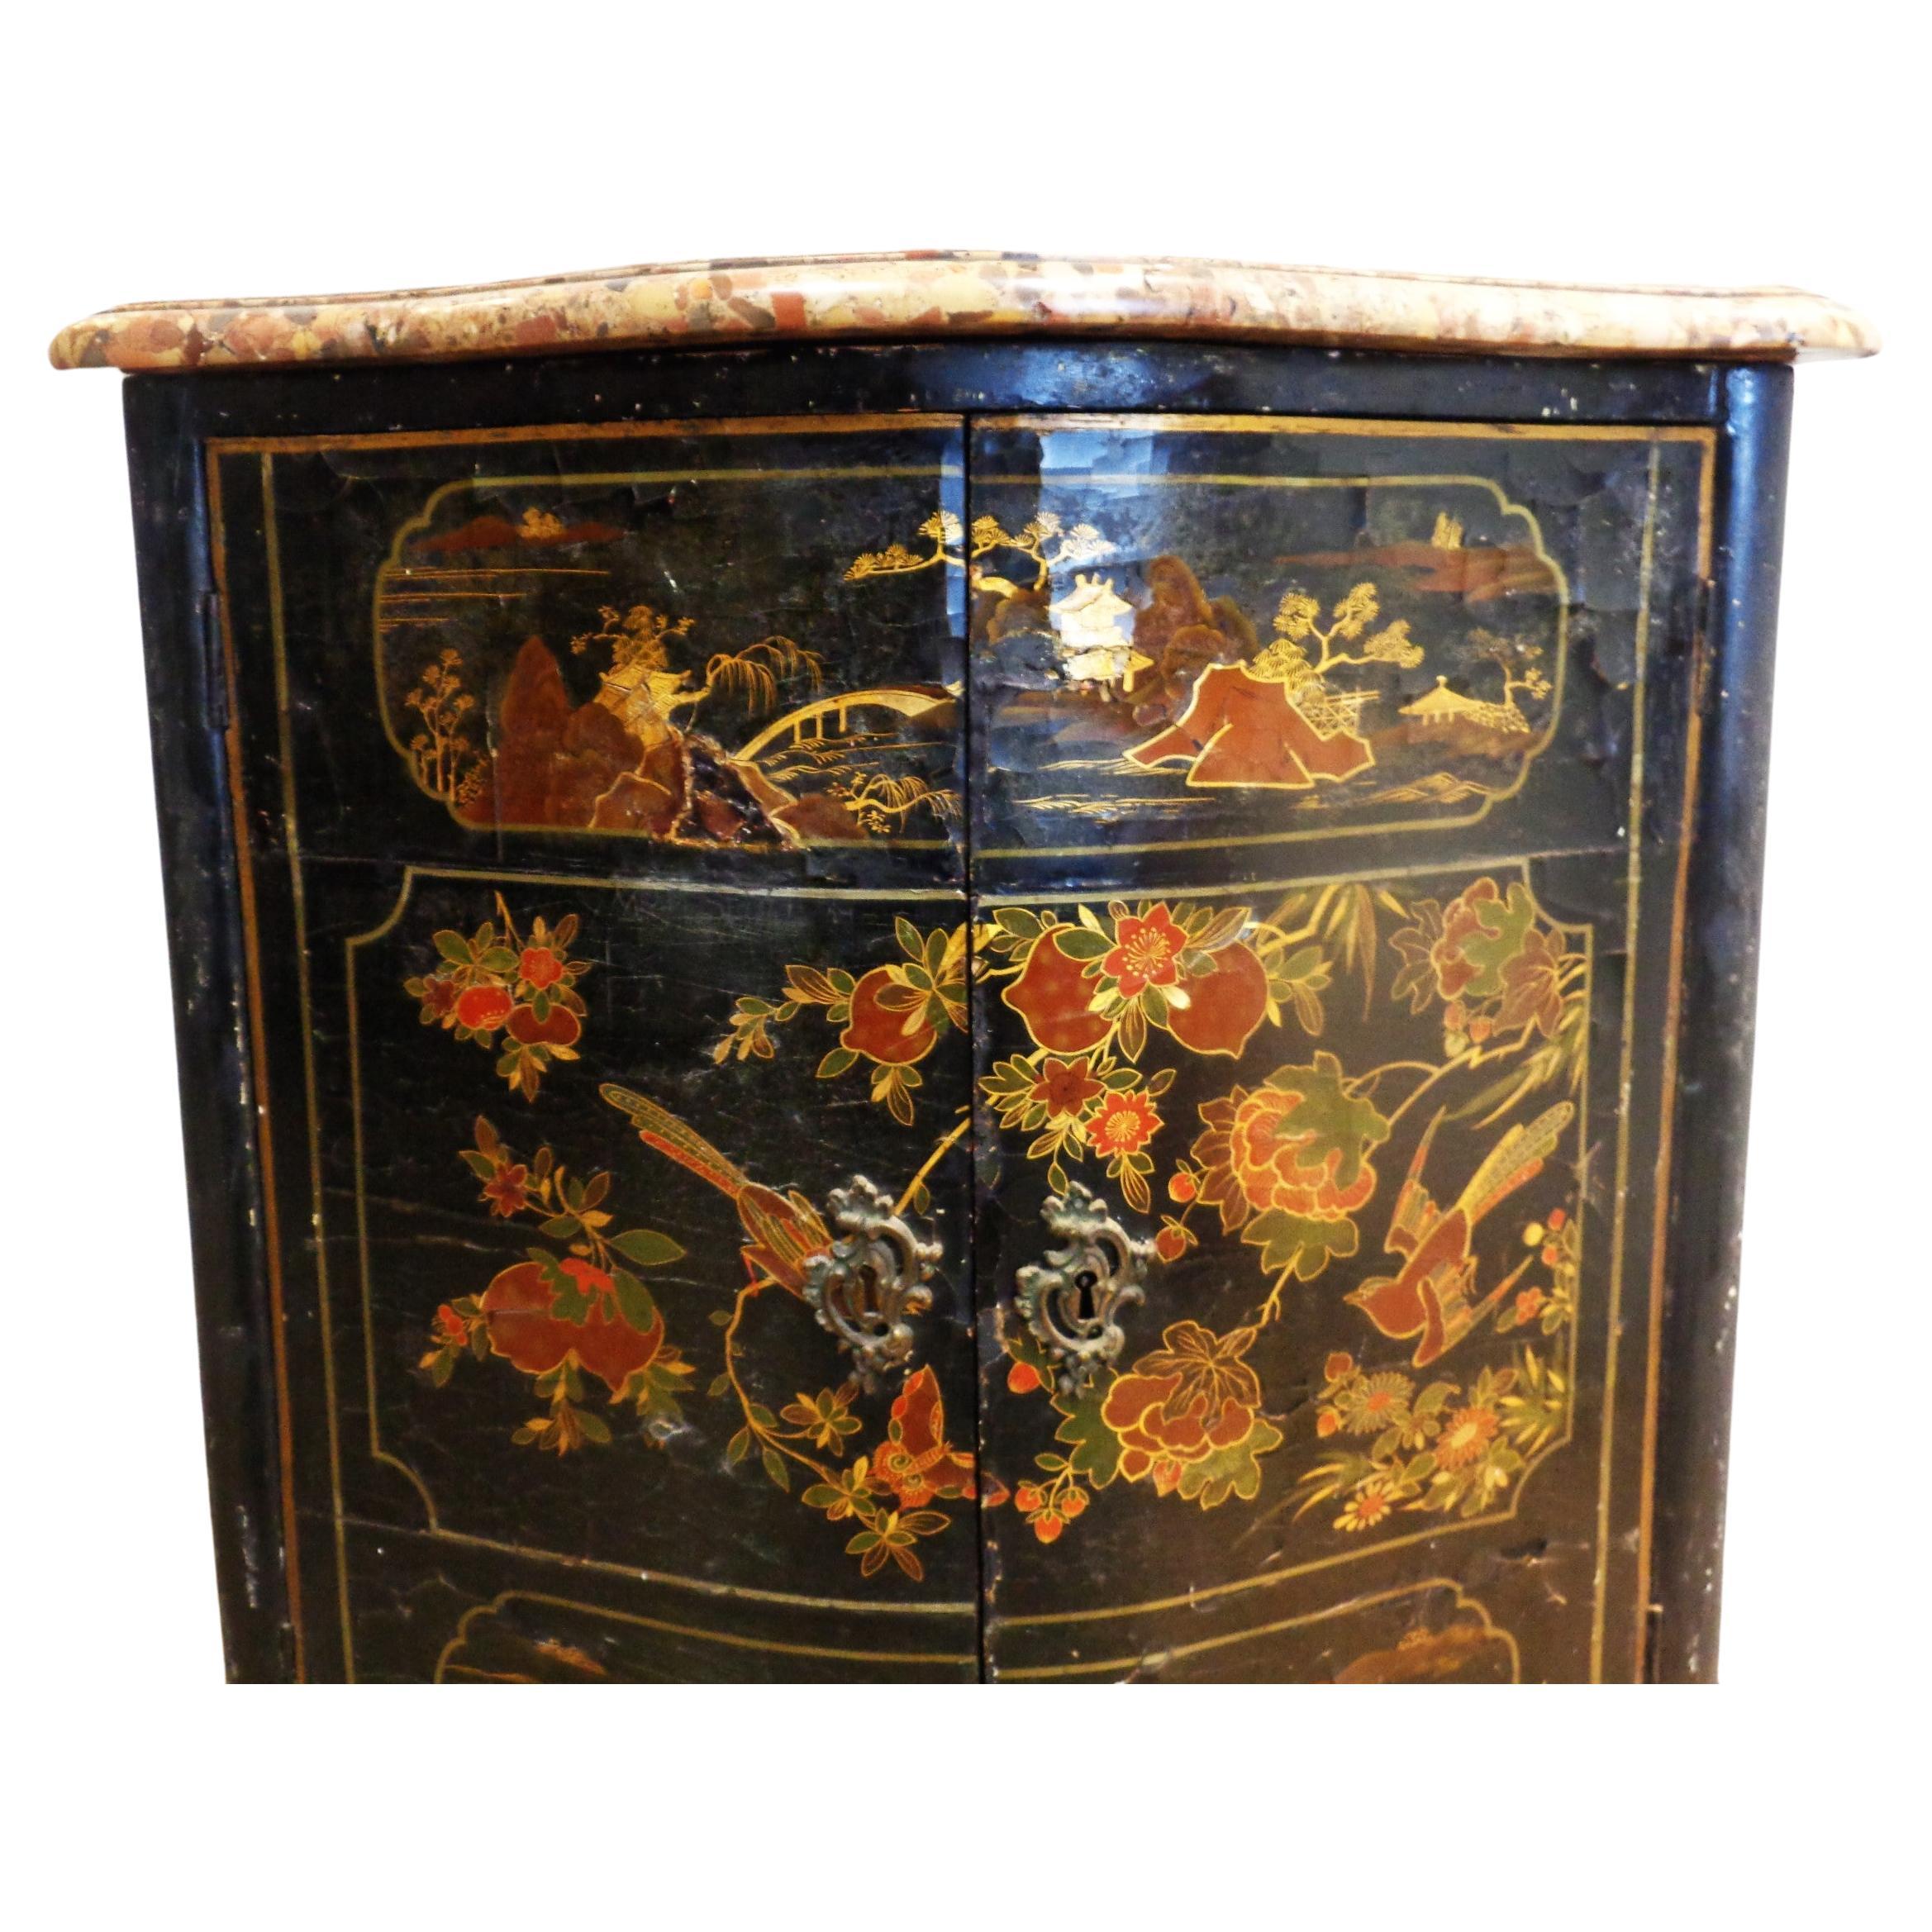 18th century French Louis XV two door bow front corner cabinet with cabriole legs / all over black lacquerered and finely gilded and polychrome chinoiserie decoration - floral vines birds scenic / specimen stone marble top / nicely detailed aged